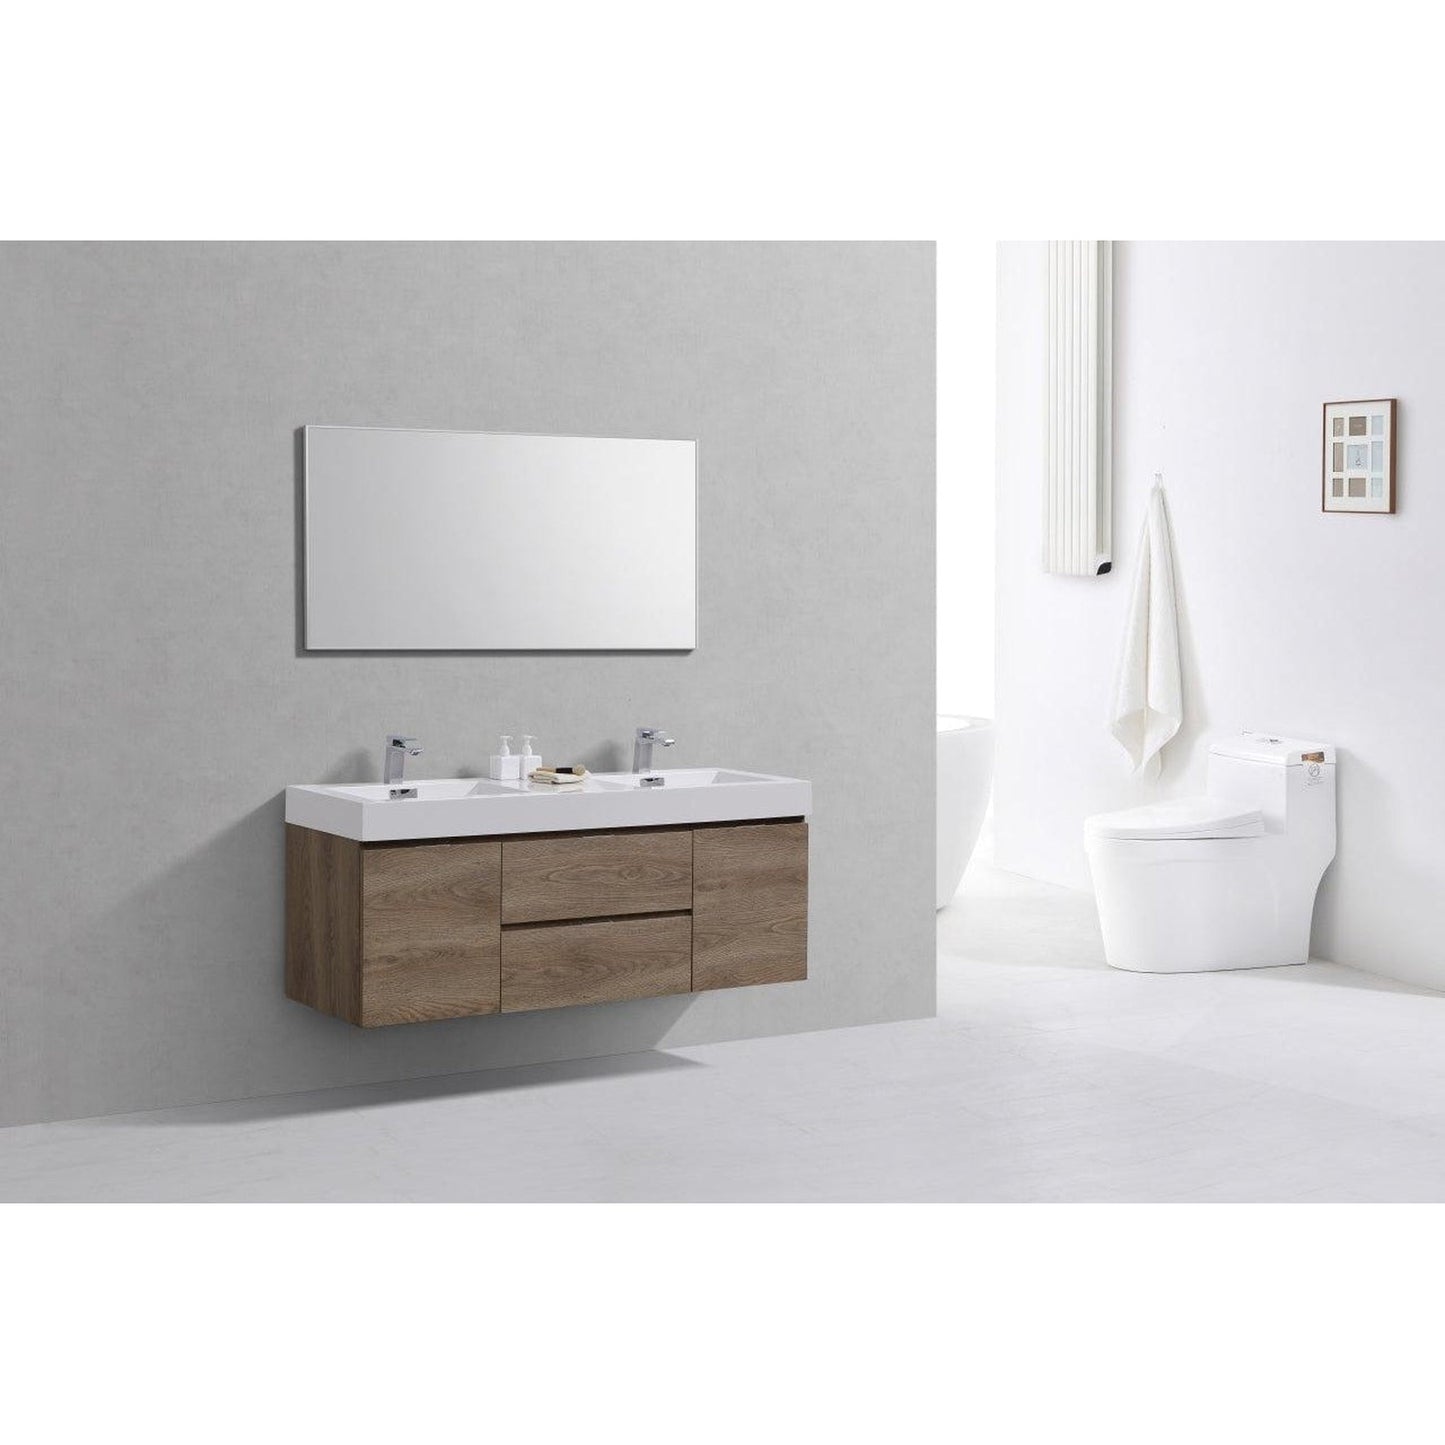 KubeBath Bliss 60" Butternut Wall-Mounted Modern Bathroom Vanity With Double Integrated Acrylic Sink With Overflow and 60" Butternut Framed Mirror With Shelf